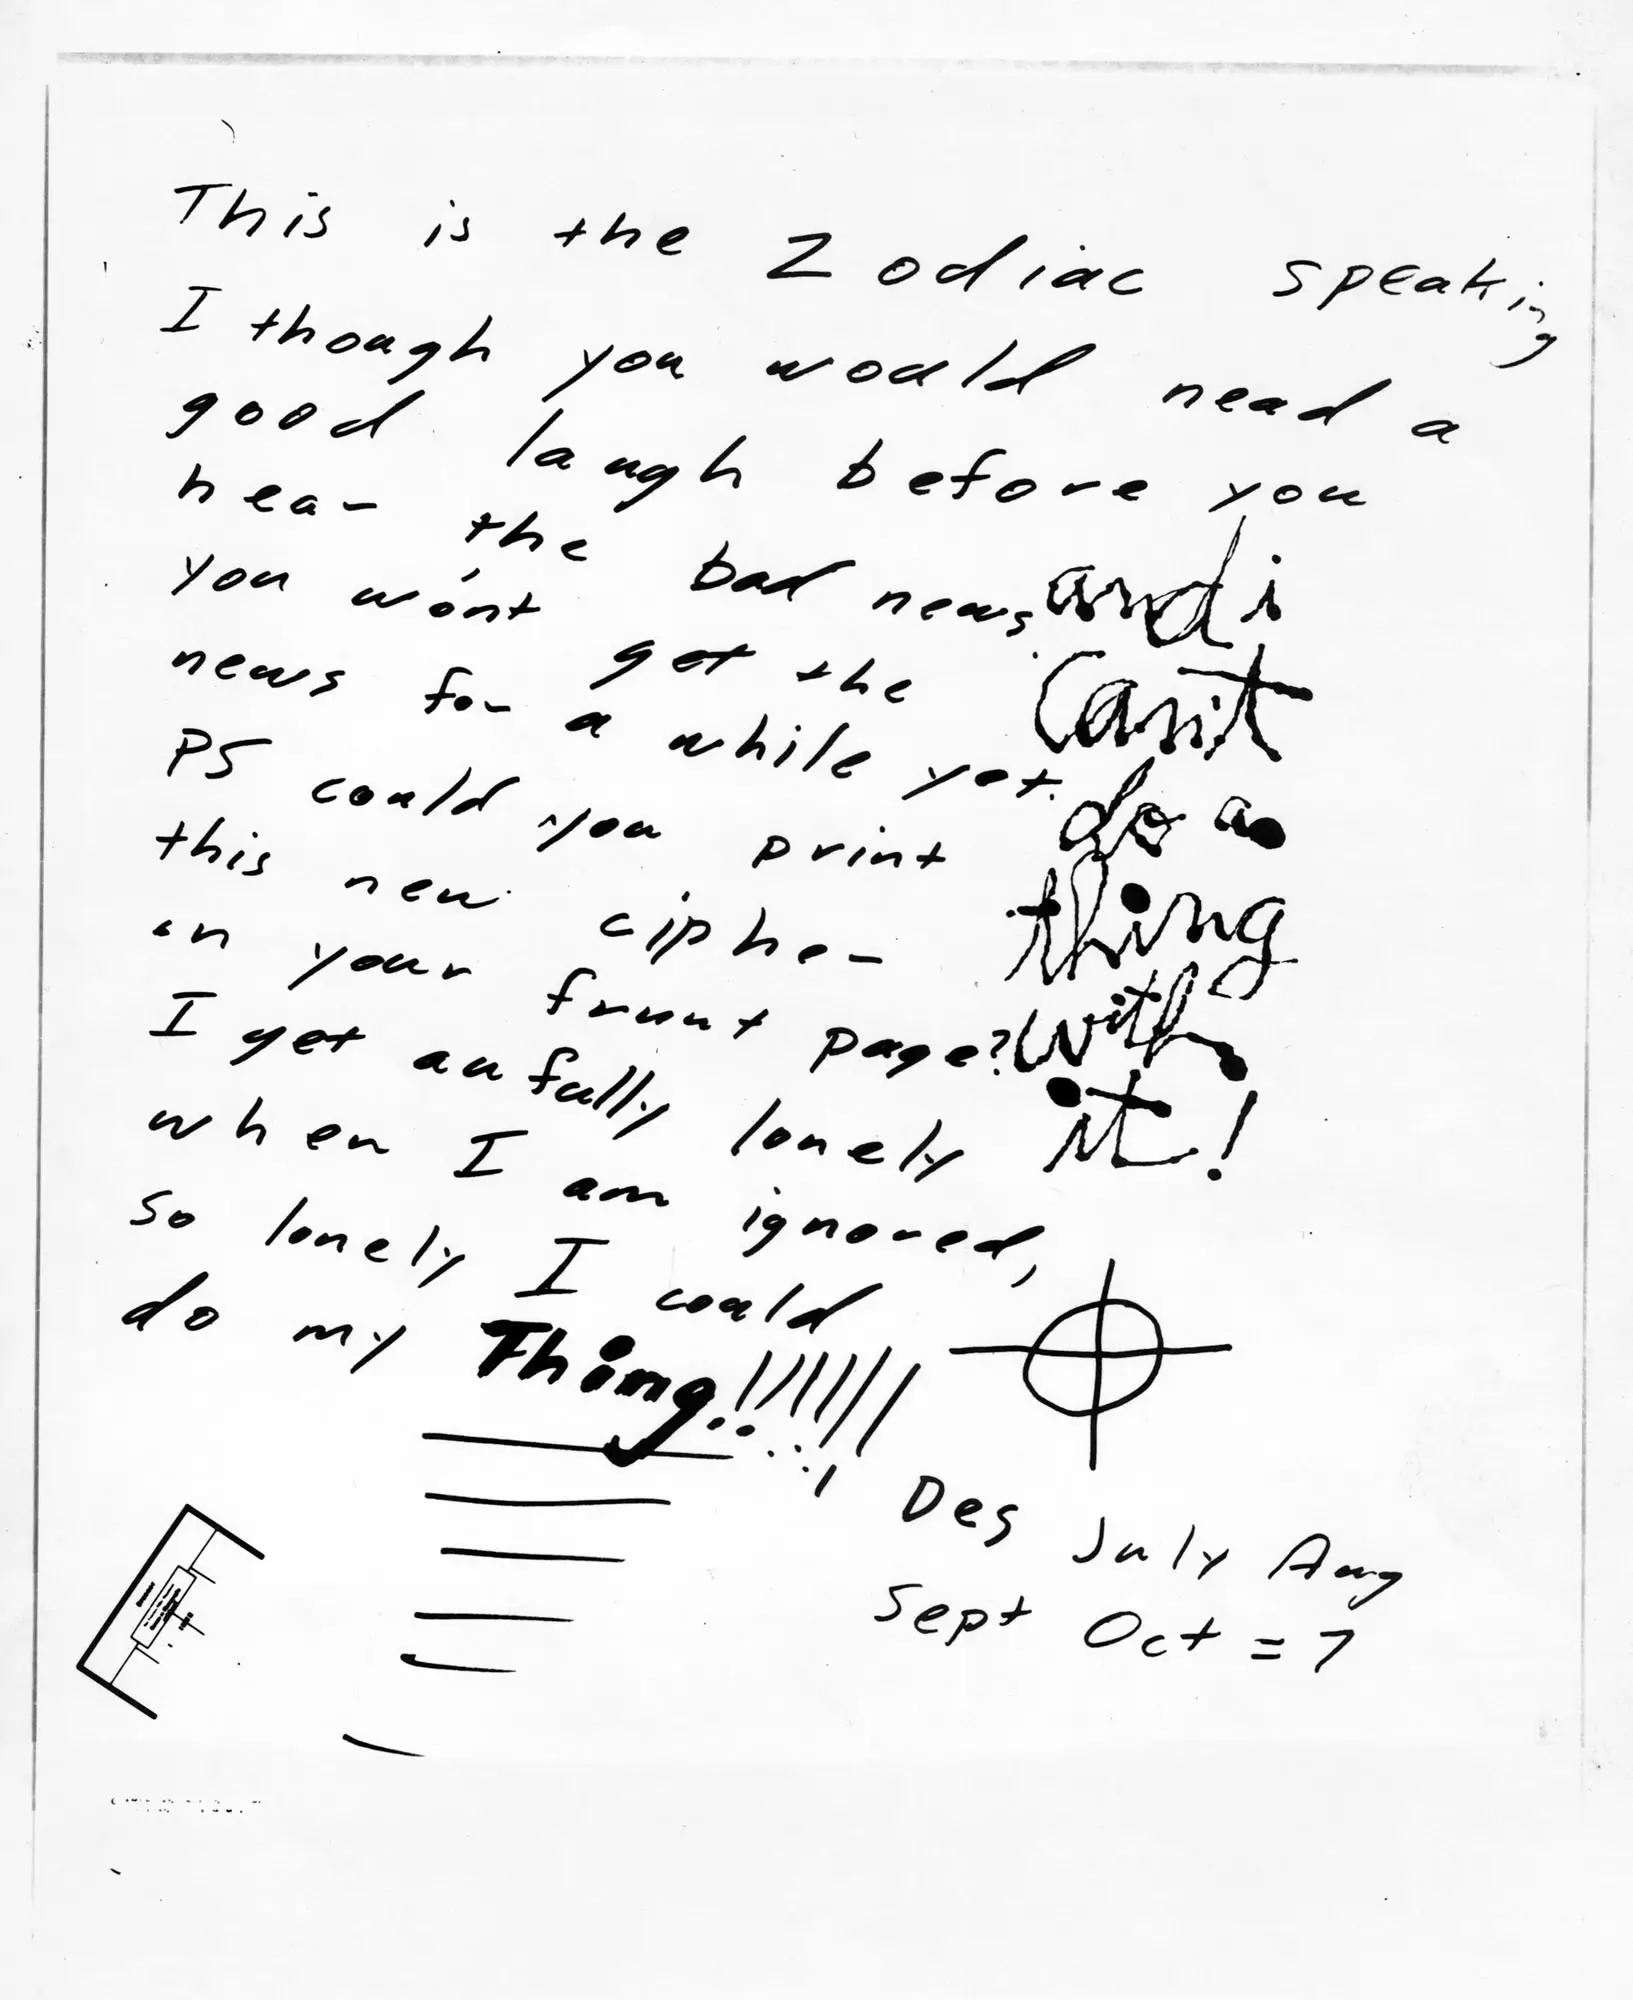 One of the letters sent to the press by the Zodiac Killer.